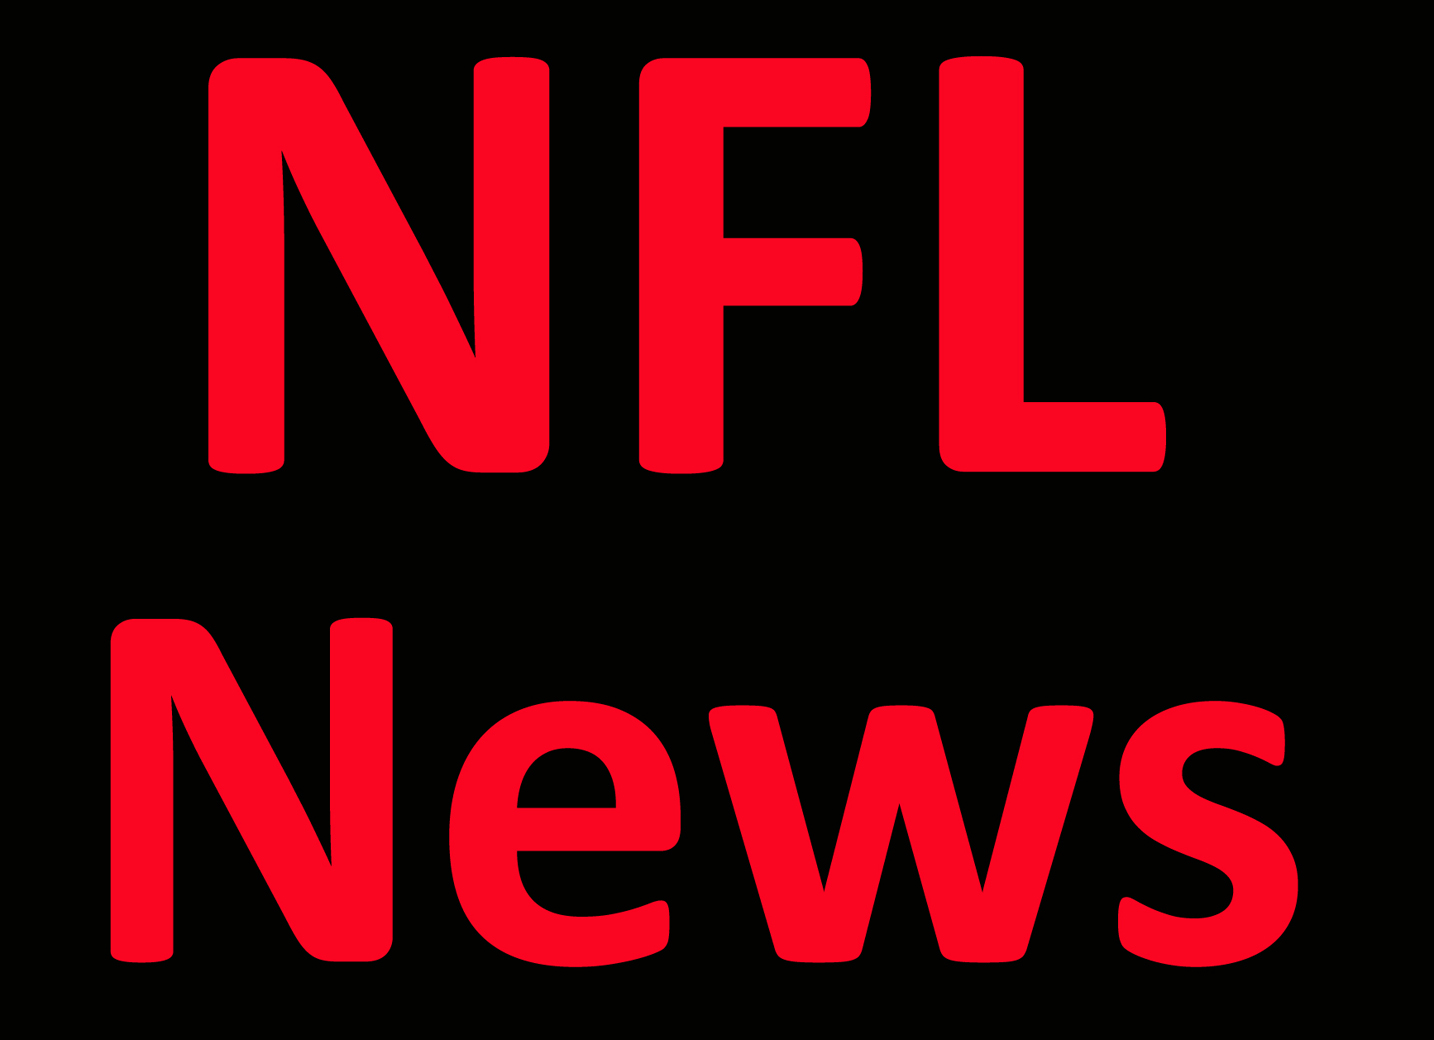 NFL News: Score picks, bold predictions, fantasy tips, key stats for every game Per Report